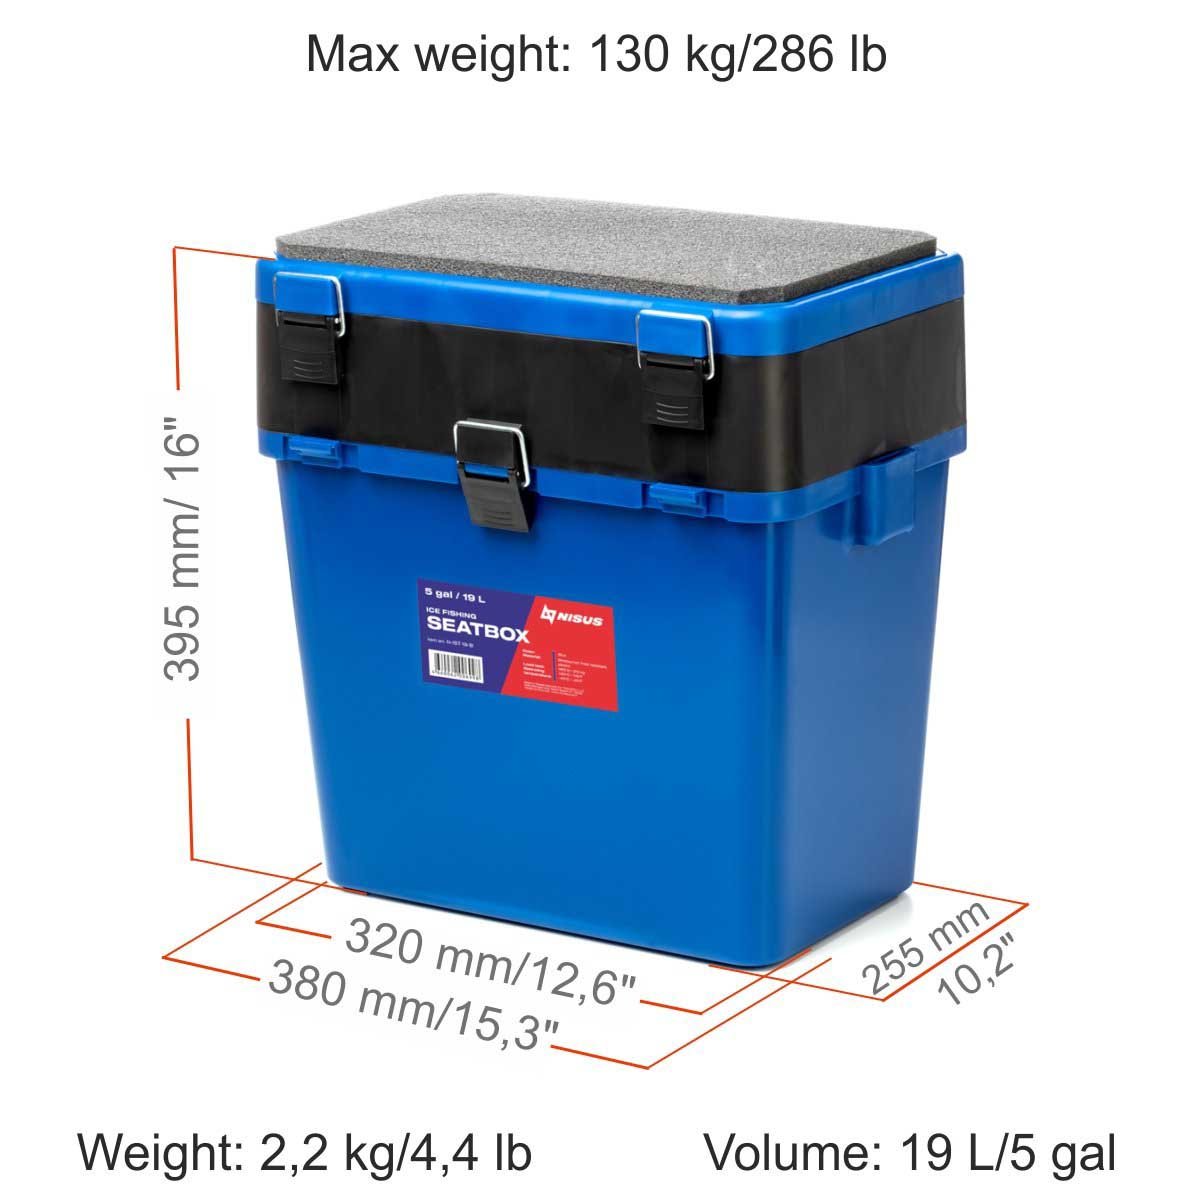 5 Gal Ice Fishing Bucket Type Box with Seat and Adjustable Shoulder Strap cpuld carry up to 286 pounds, it is 16 inches high, 12.6 inches long and 10.2 inches wide, weighing 4.4 lbs